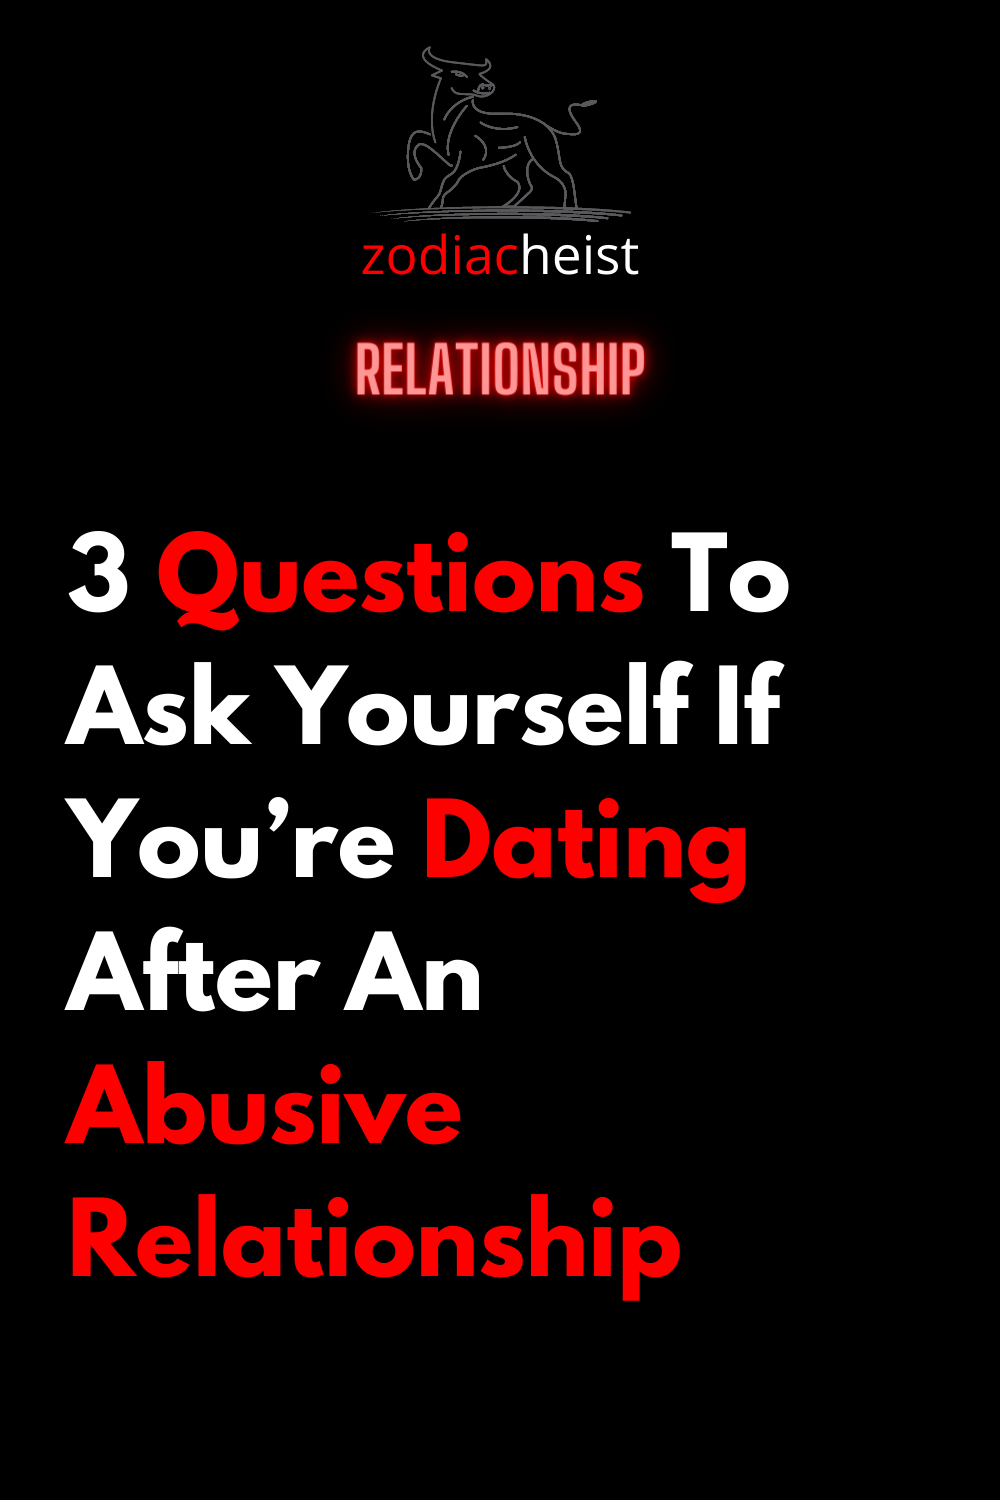 3 Questions To Ask Yourself If You’re Dating After An Abusive Relationship